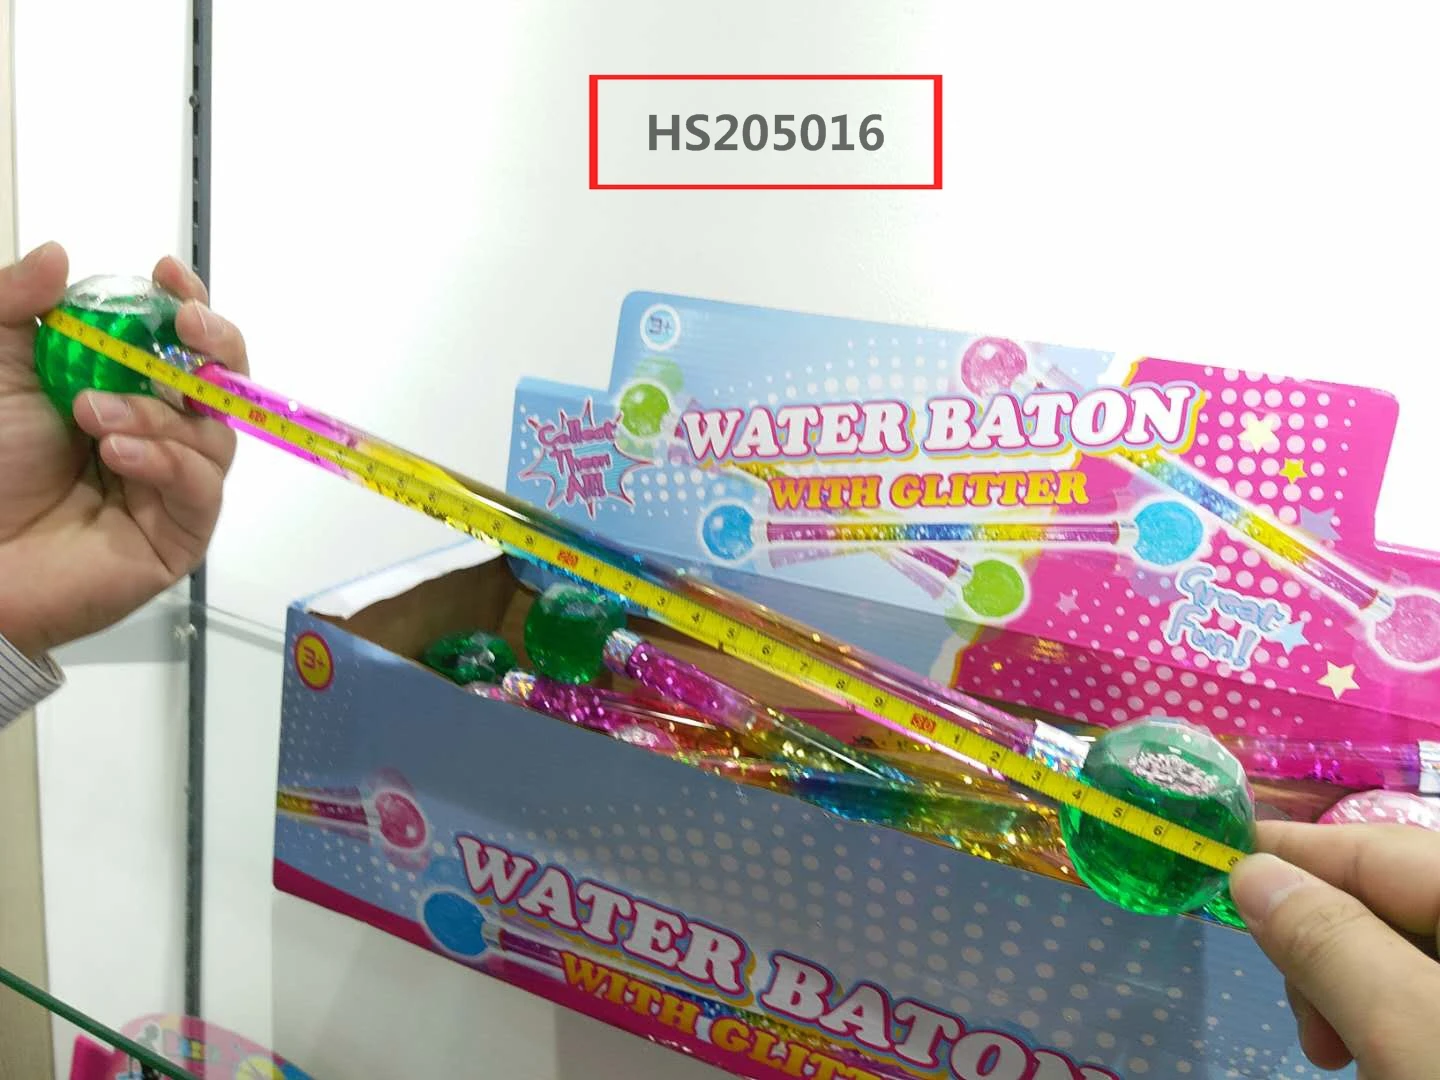 HS205016, Huwsin Toys, Dollar shop Water baton with glitter toy